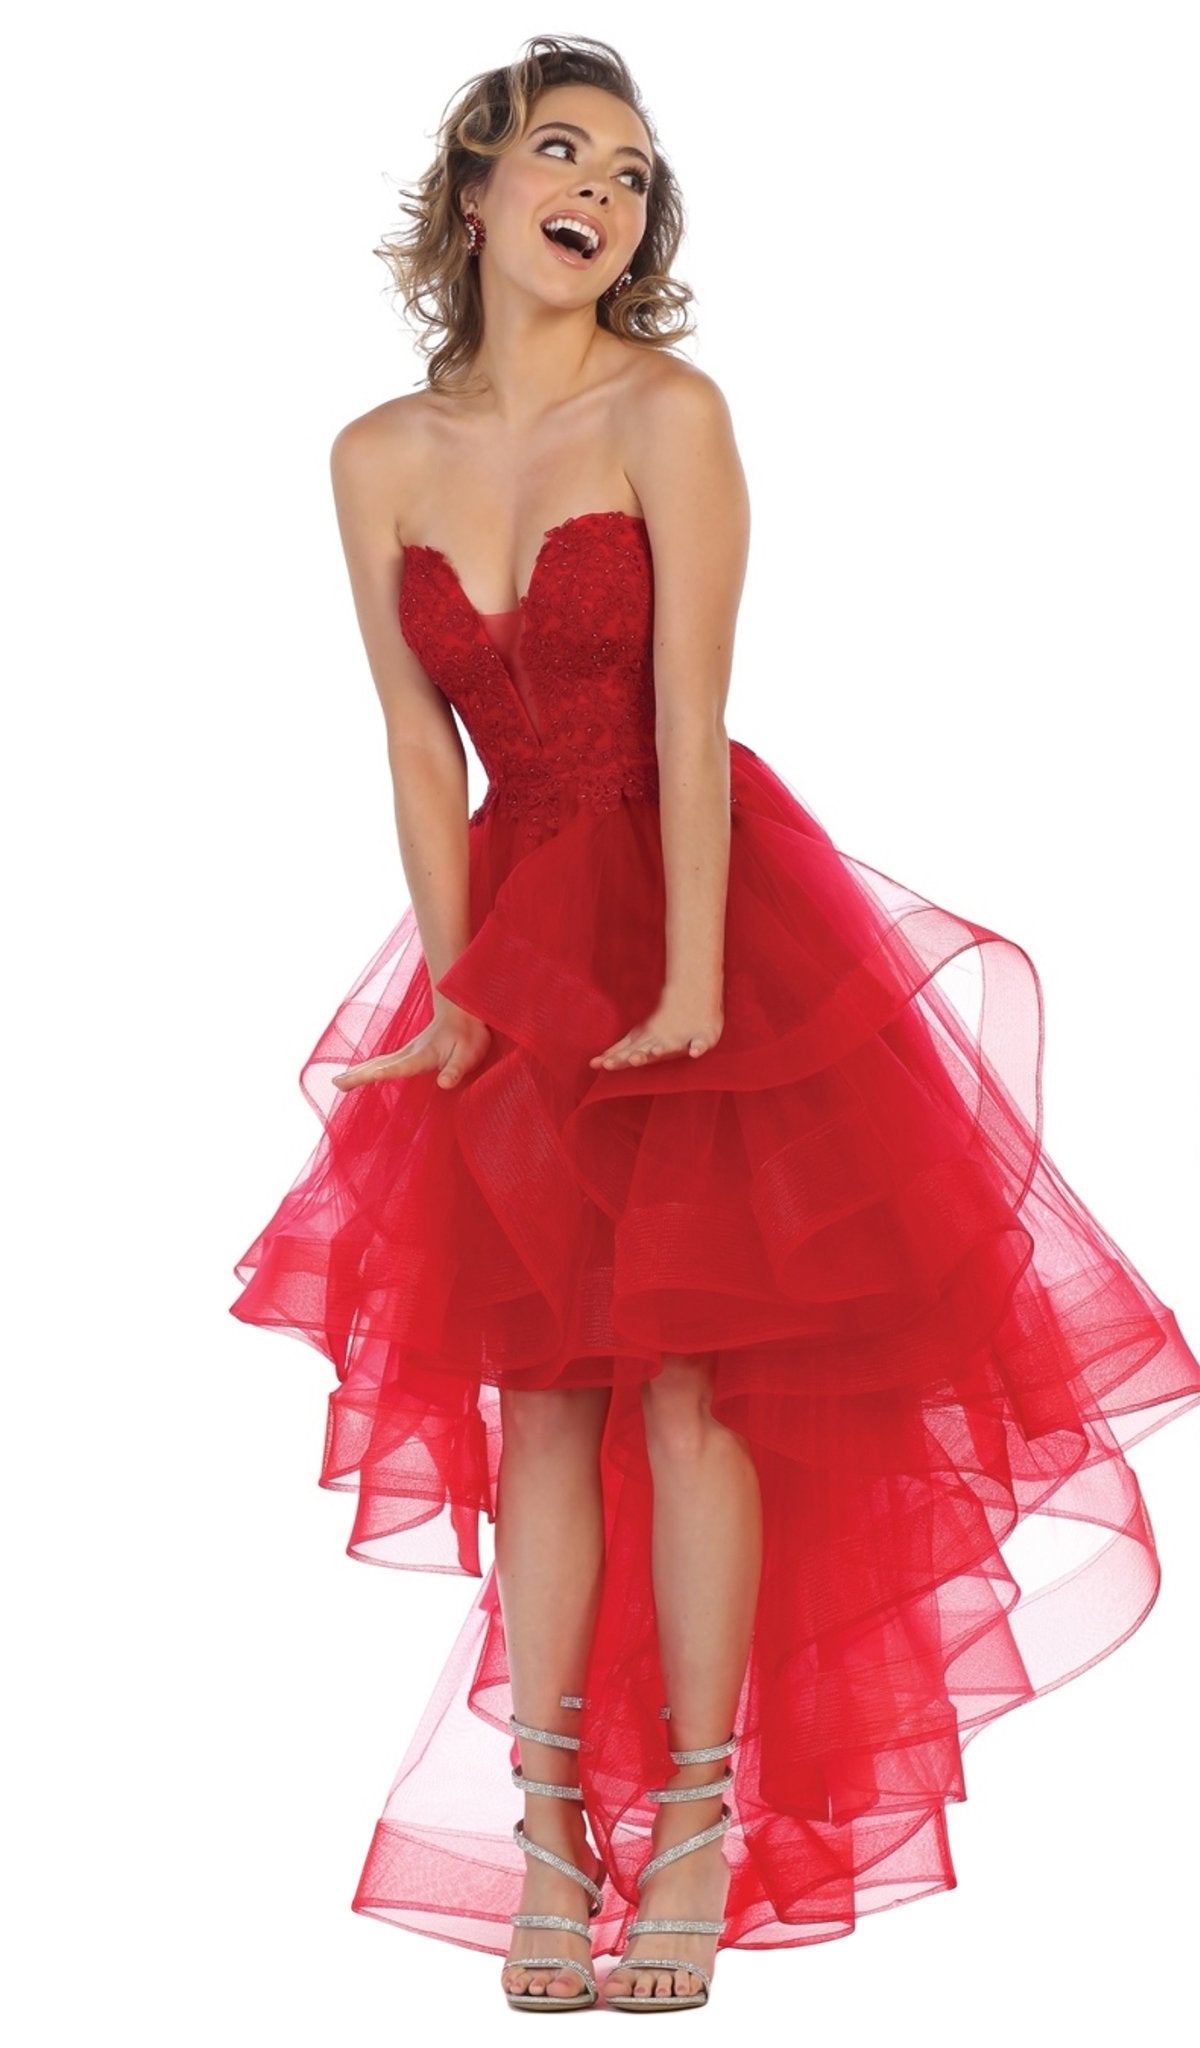 May Queen - RQ7716 Strapless Lace Appliqued High Low Gown In Red